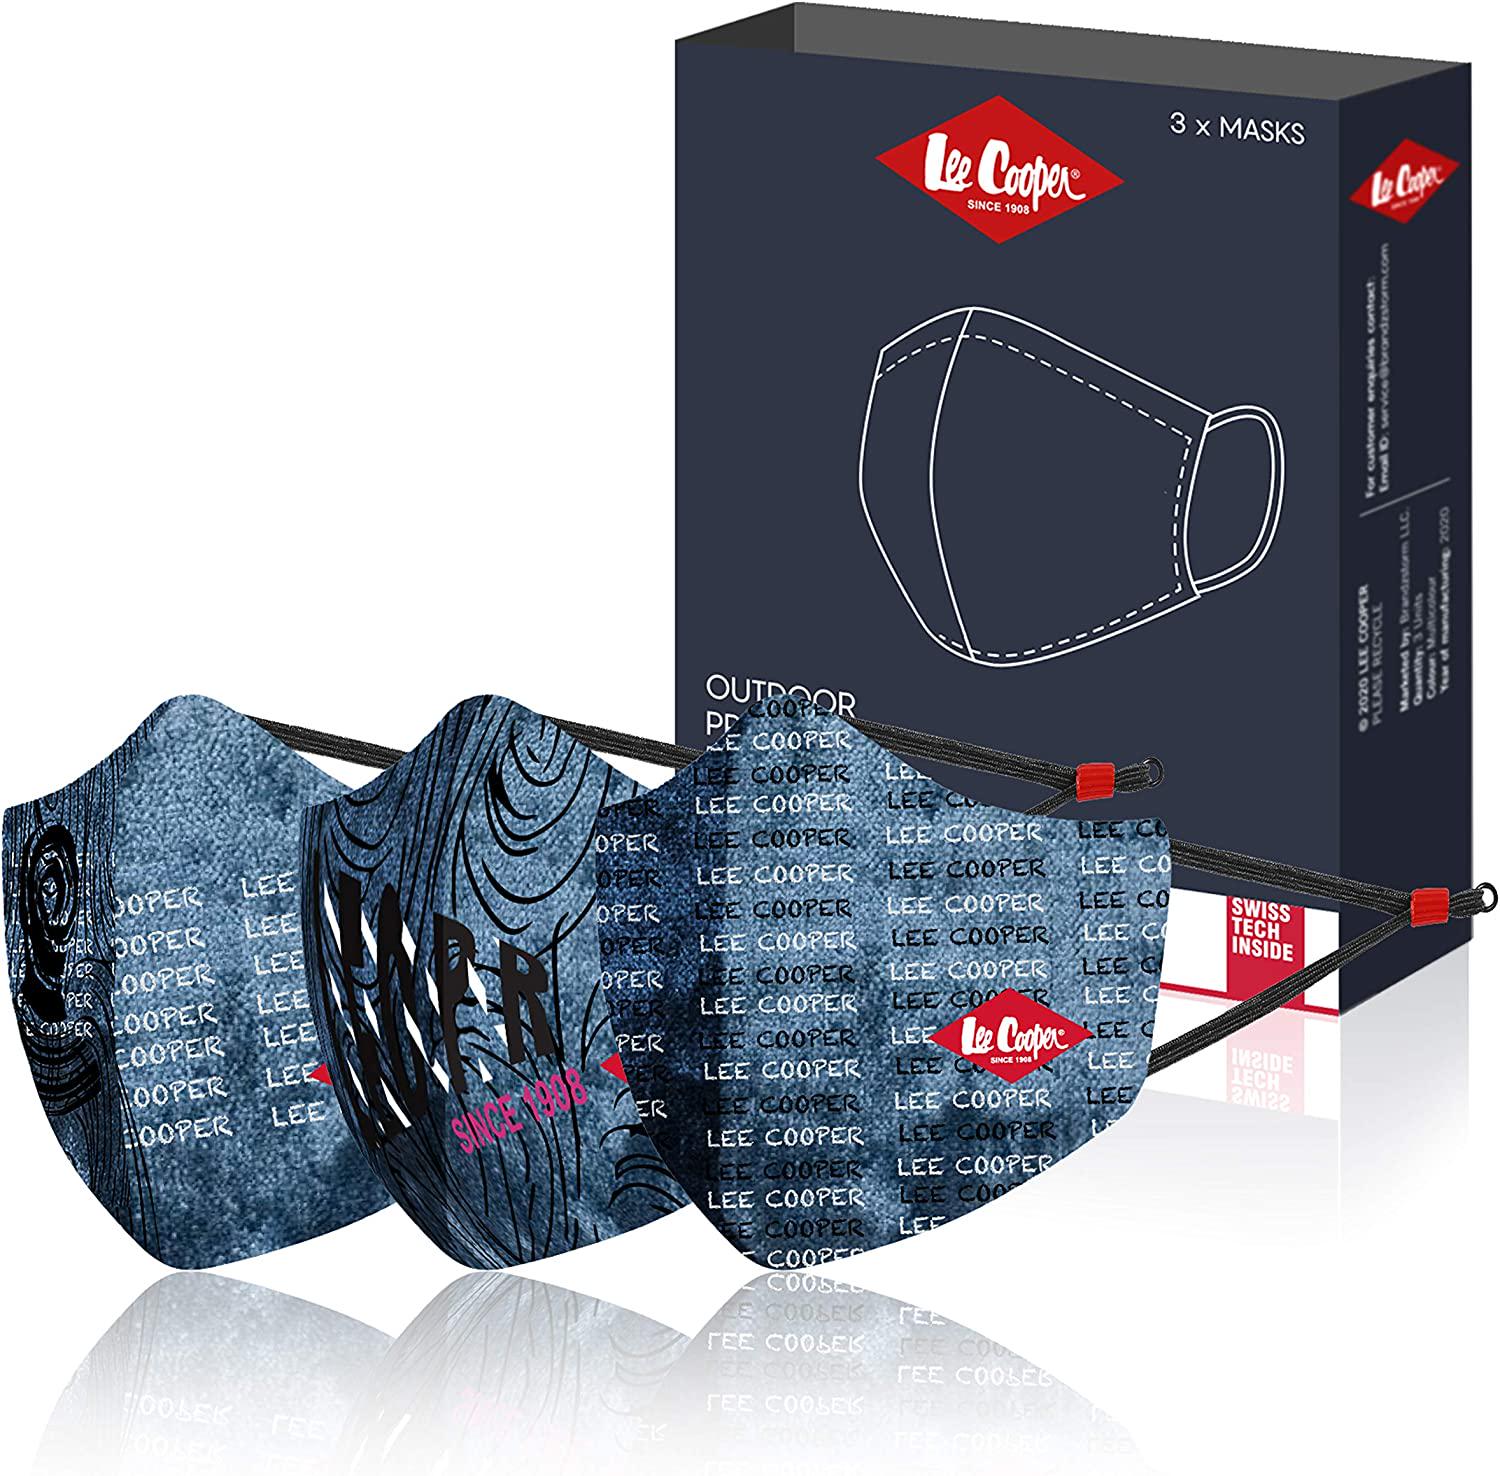 LEE COOPER, Lee Cooper Sublimation Face Mask with HeiQ V-block and SmartTemp - Lightweight, Reusable Designer Face Covers, 3-pack